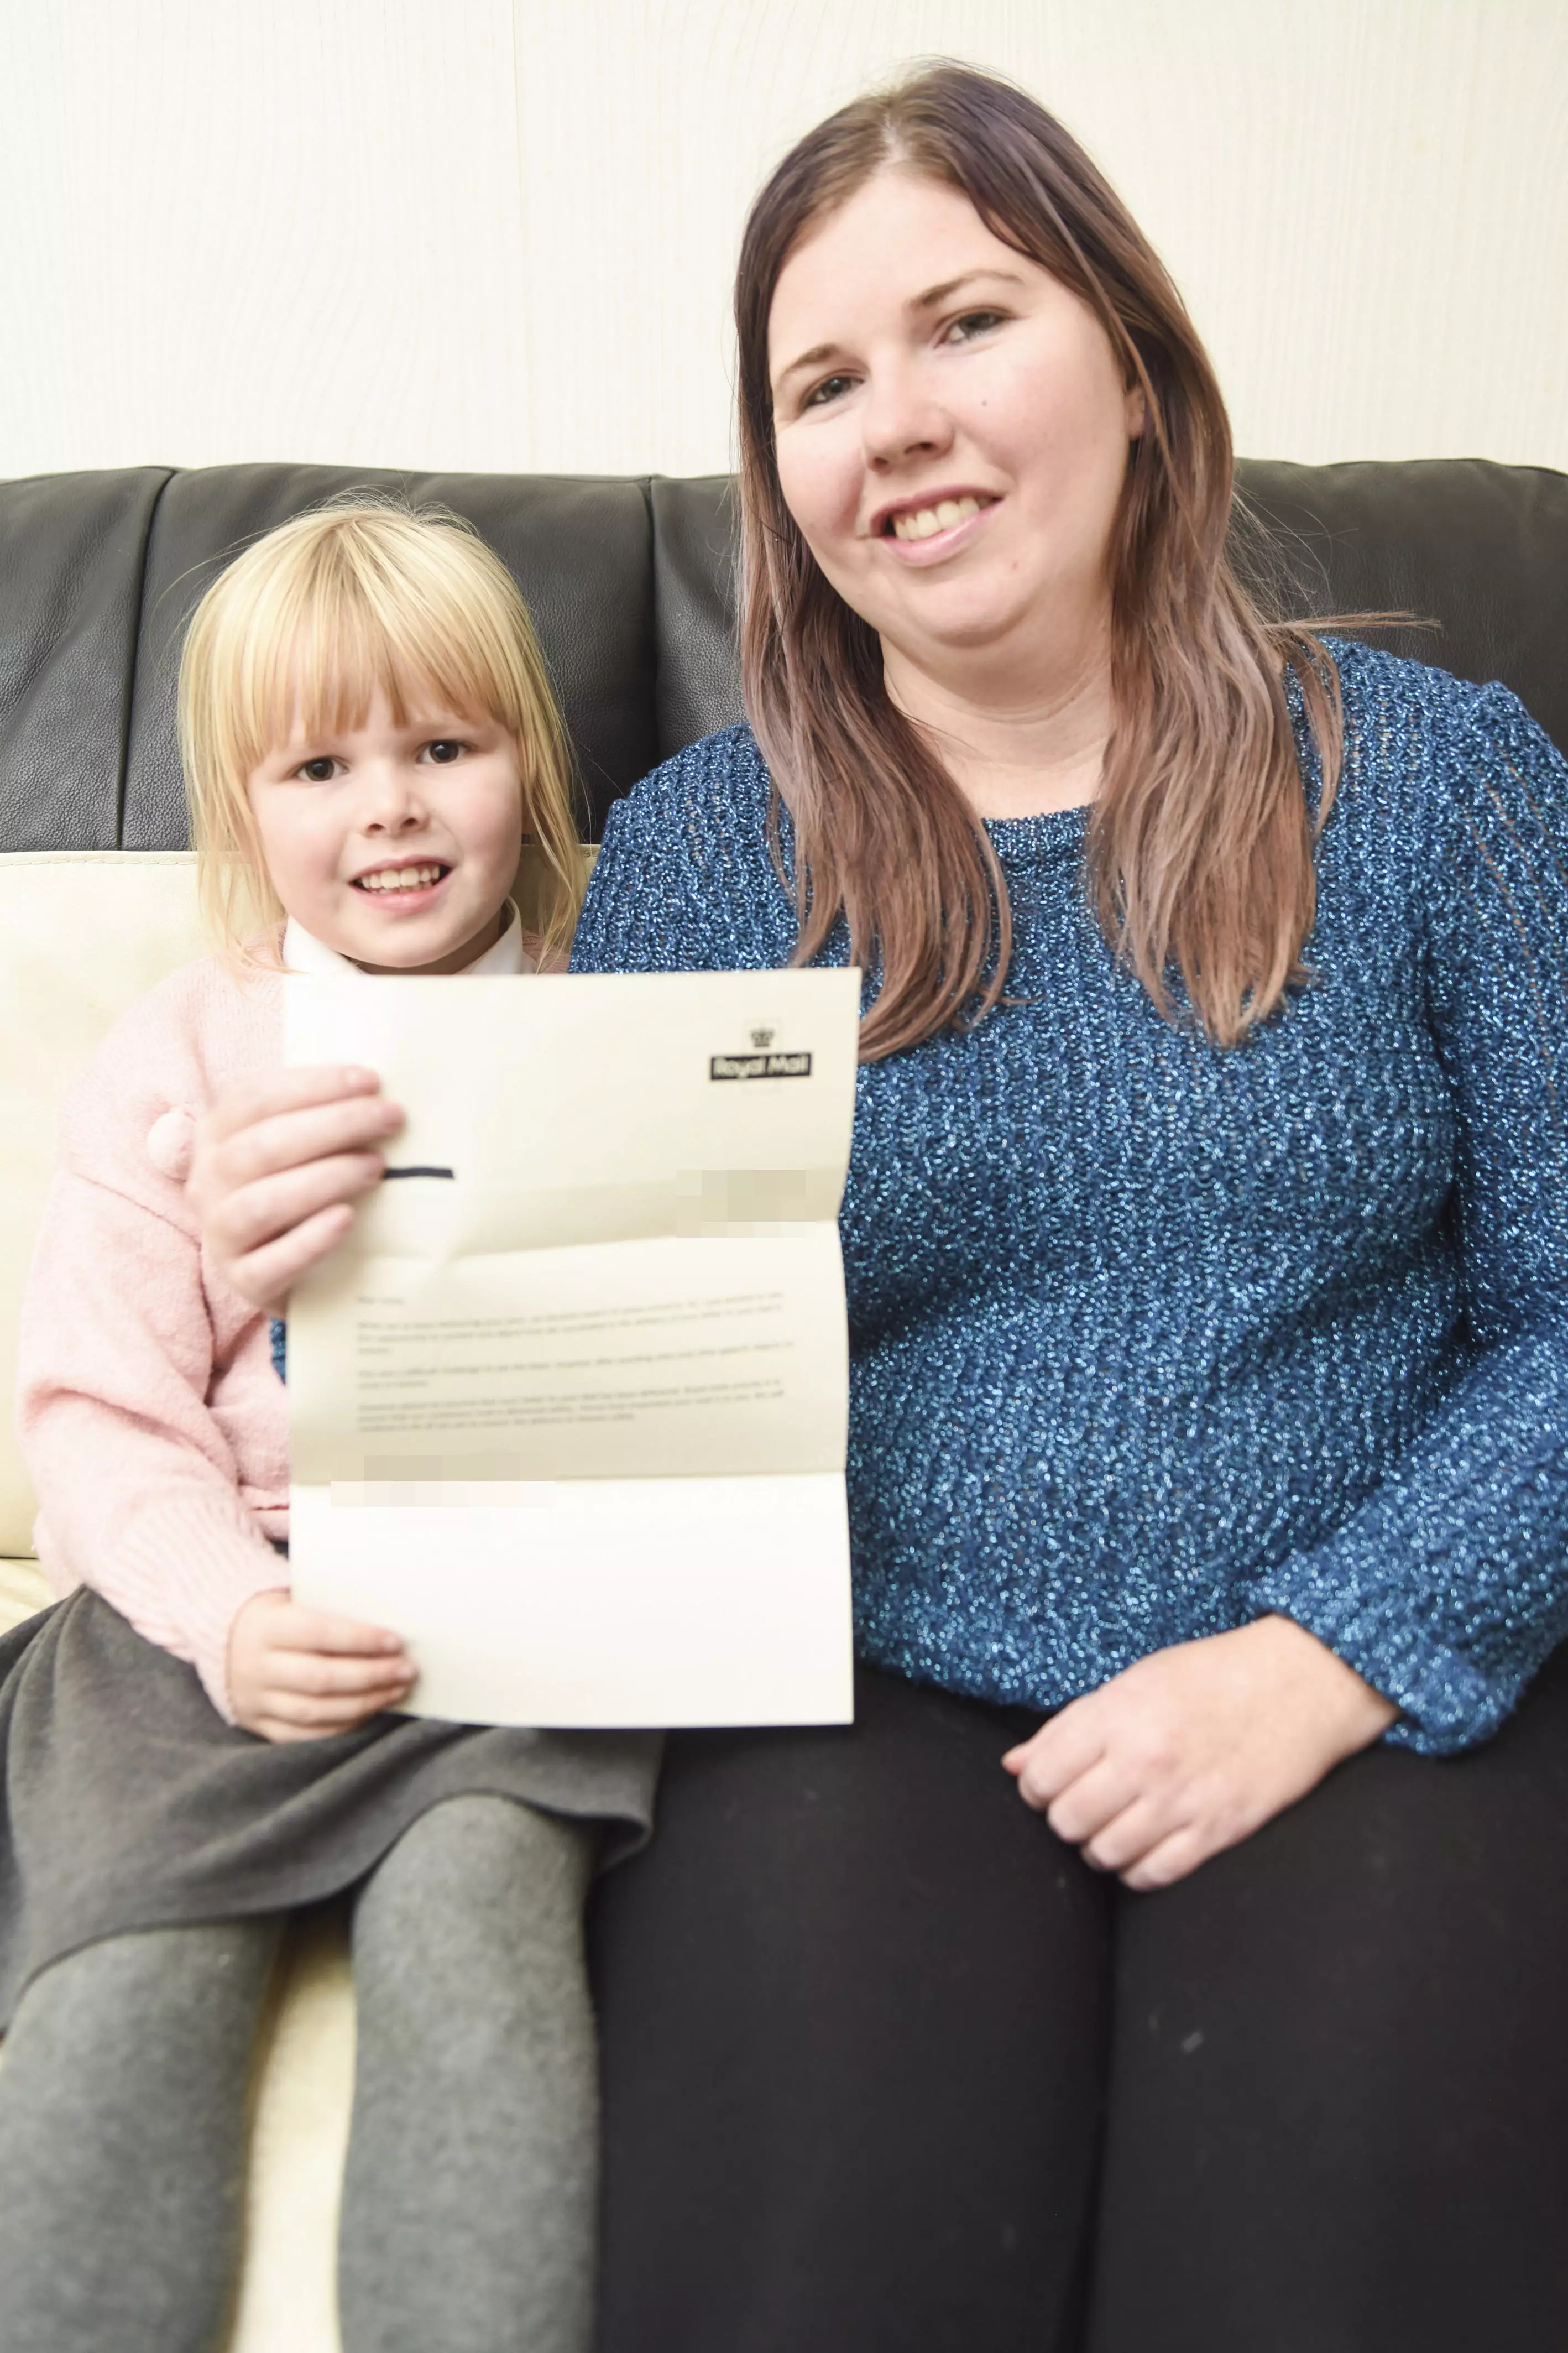 Hollie was thrilled to receive a letter from the Royal Mail (